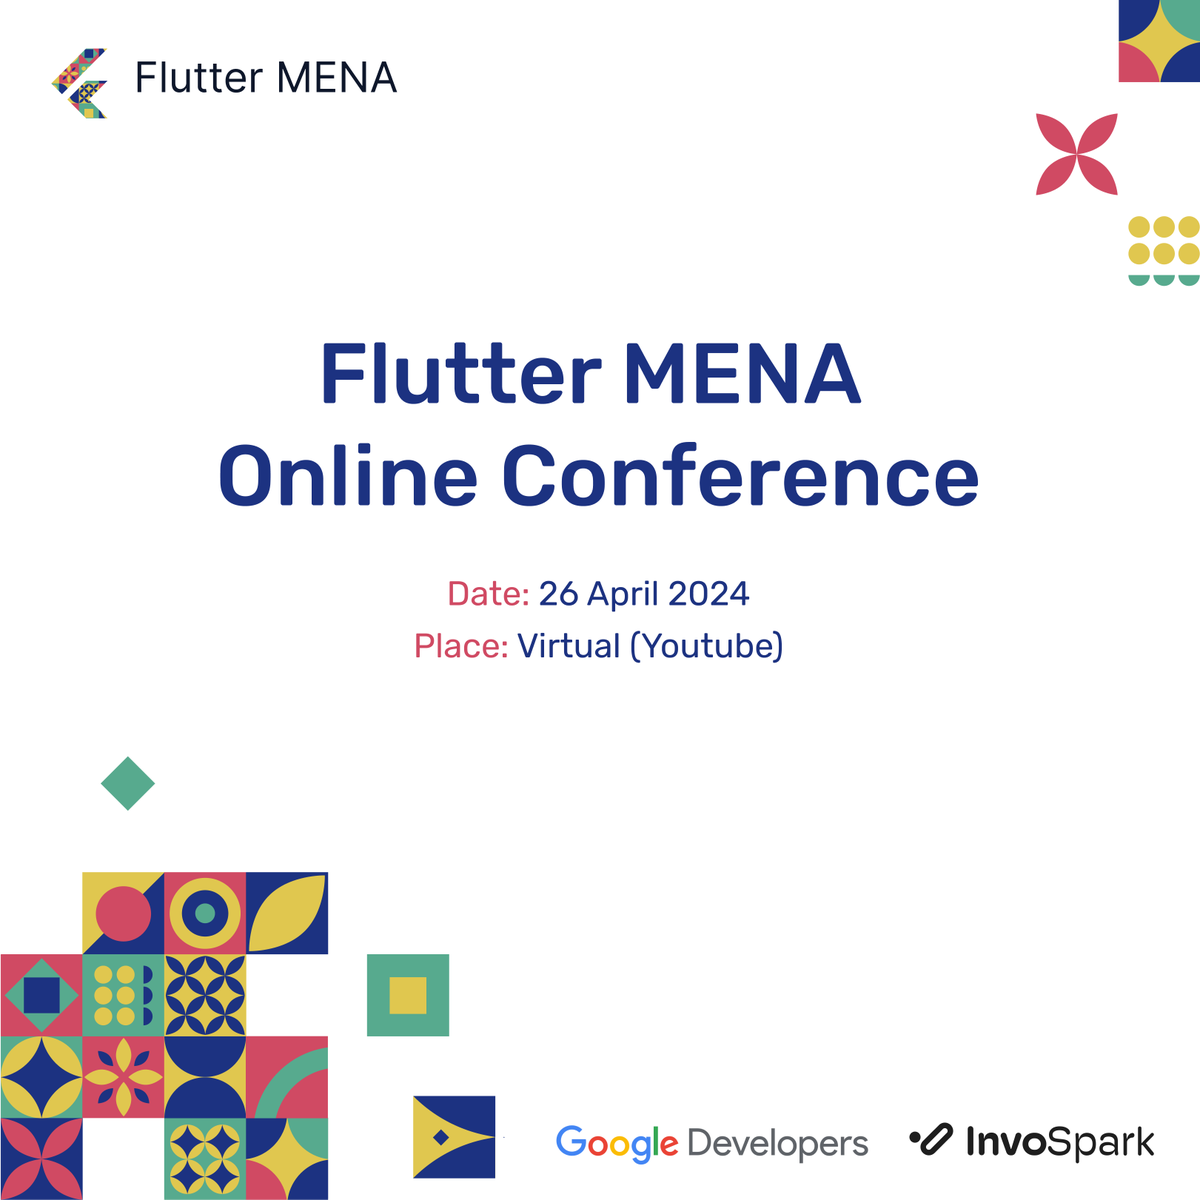 🎉 Get ready for the Flutter MENA Online Conference! 🚀🎓 Mark your calendars for 26 April 2024! We're bringing together the brightest minds in Flutter development - virtually on YouTube. Perfect for pros and newcomers alike. Hosted by #FlutterMENA and @InvoSpark